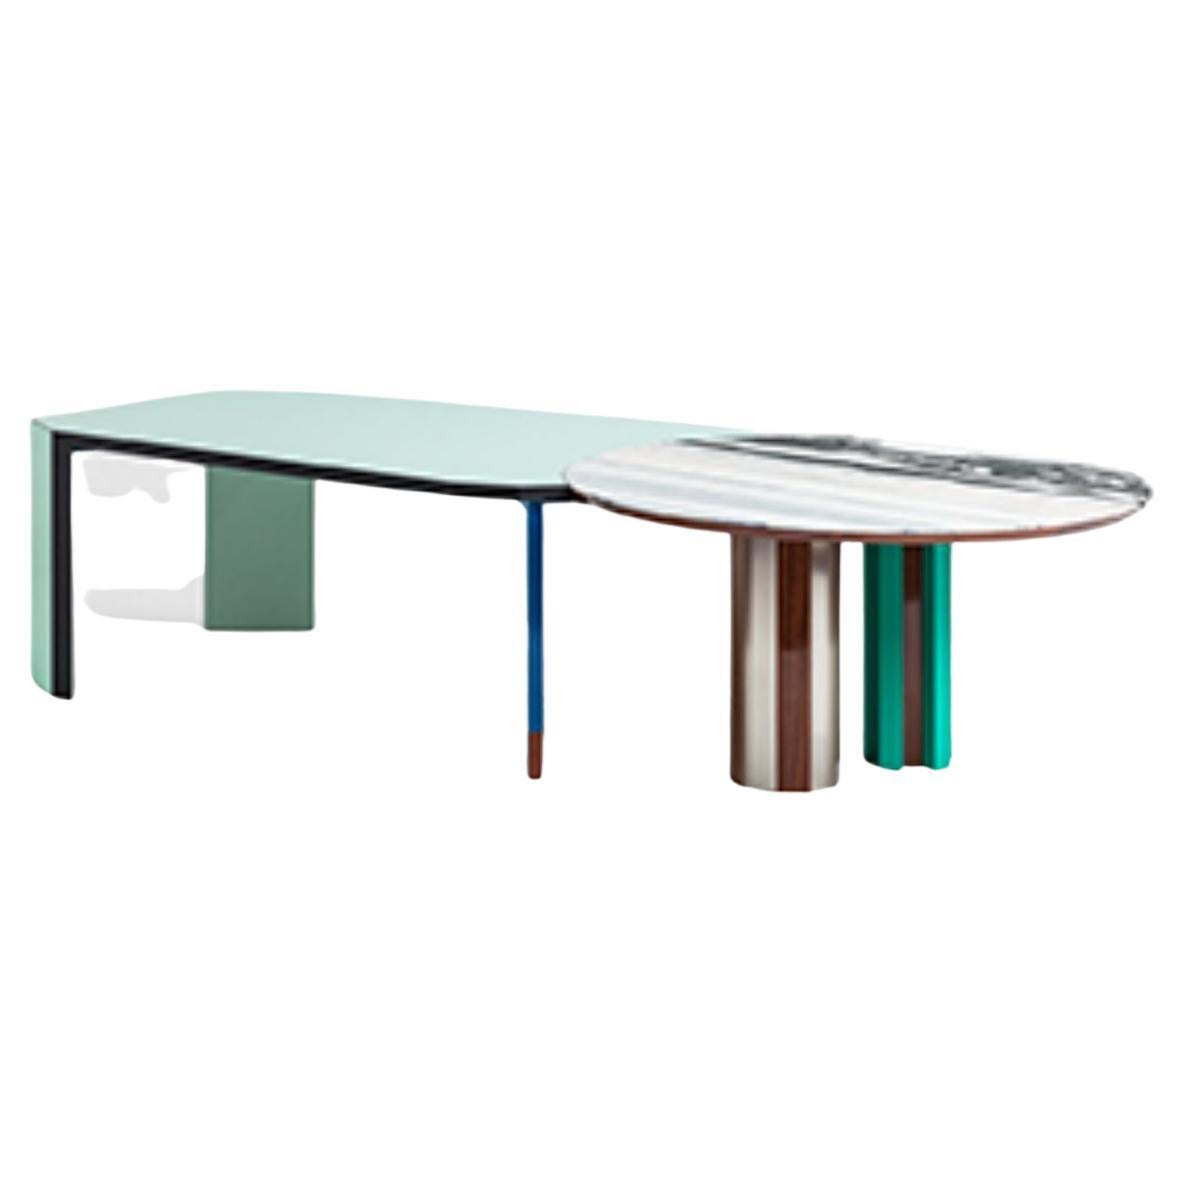 Duale Table by SEM